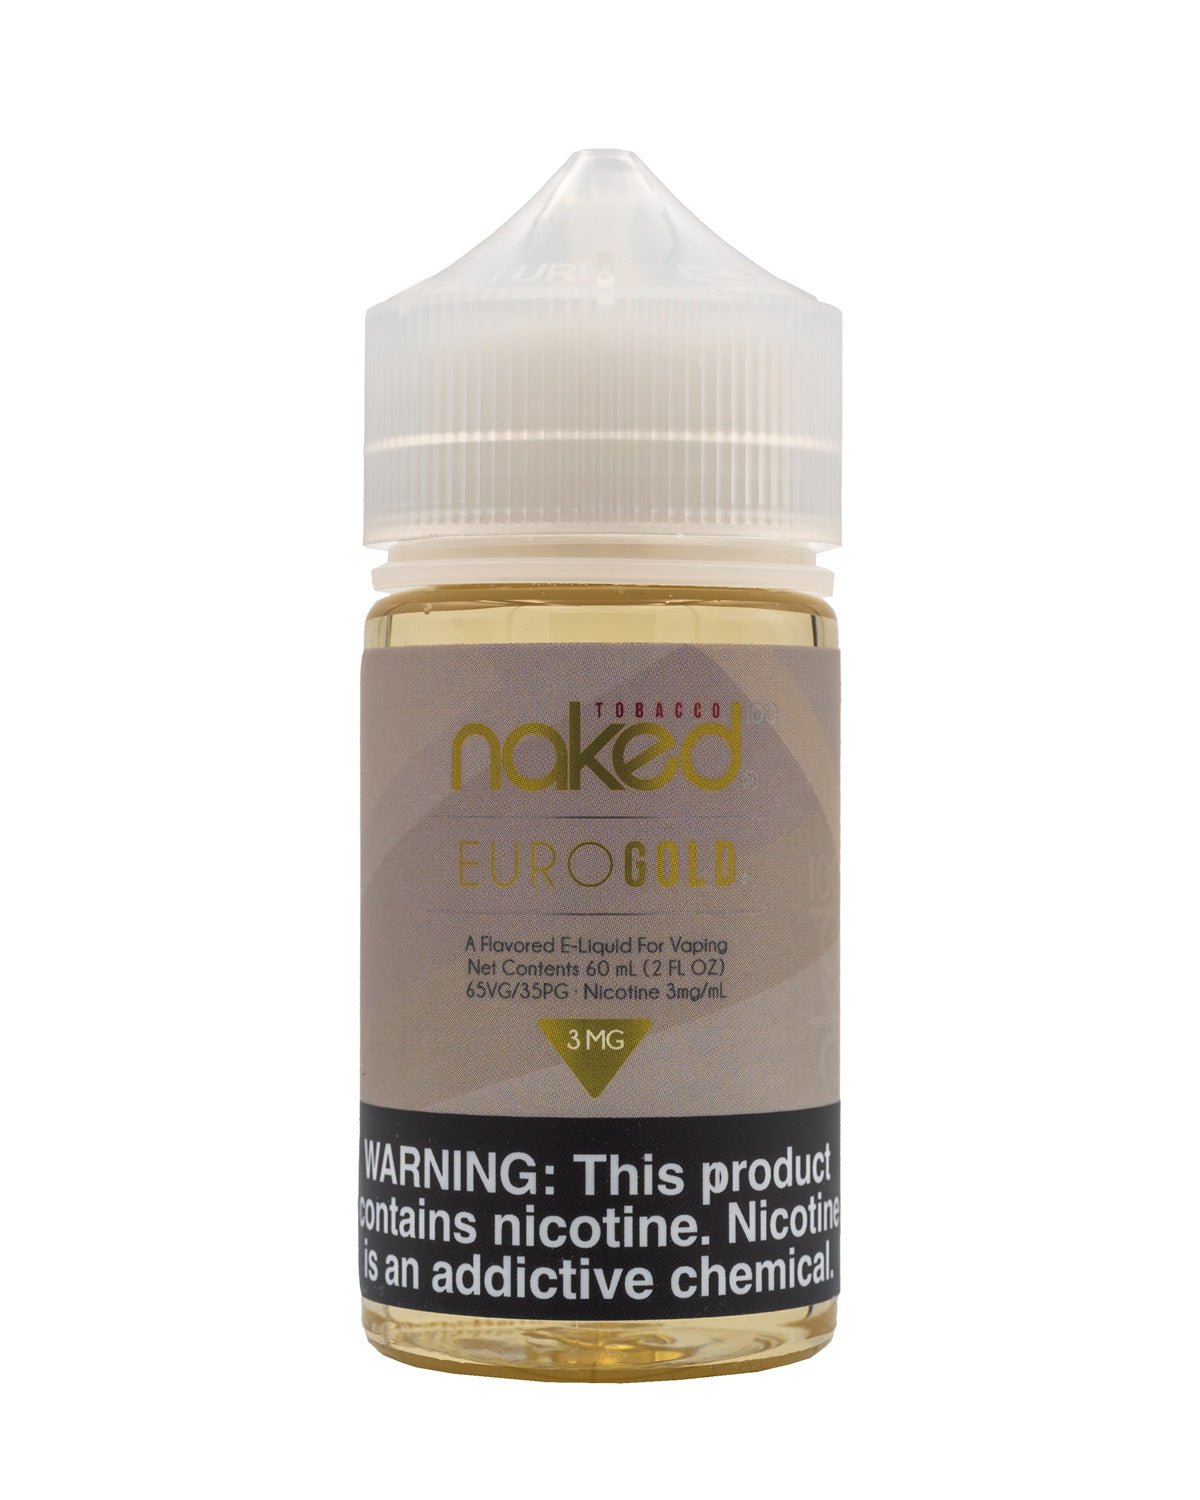 Euro Gold by Naked 100 60ML EJUICE - EJUICEOVERSTOCK.COM